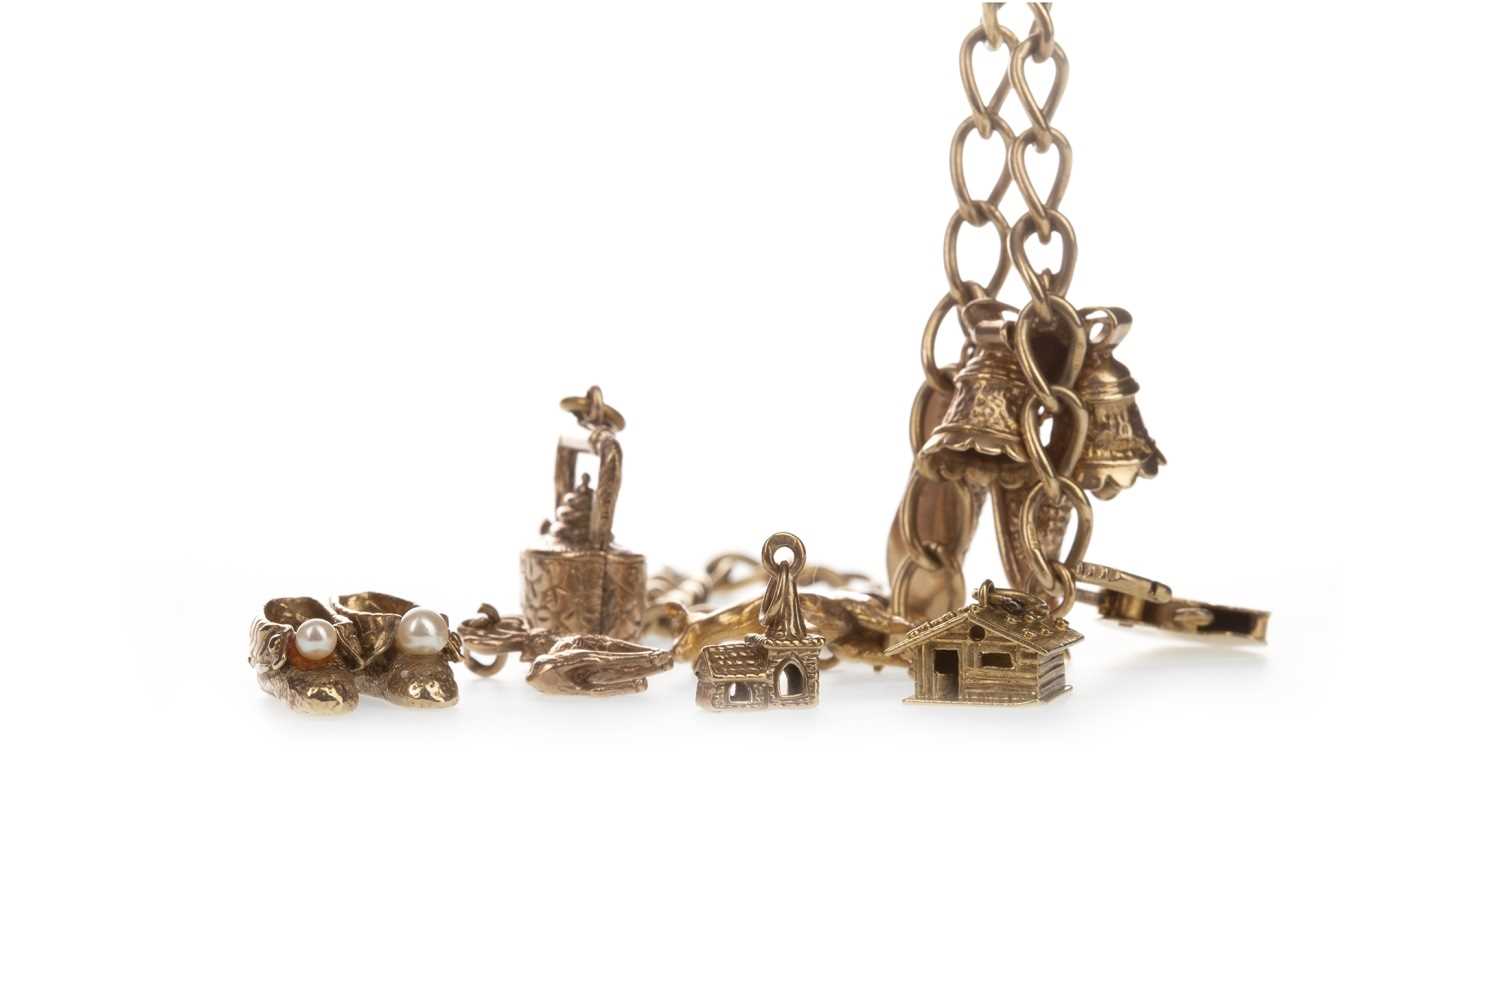 Lot 309 - A GOLD CHARM BRACELET ALONG WITH LOOSE CHARMS